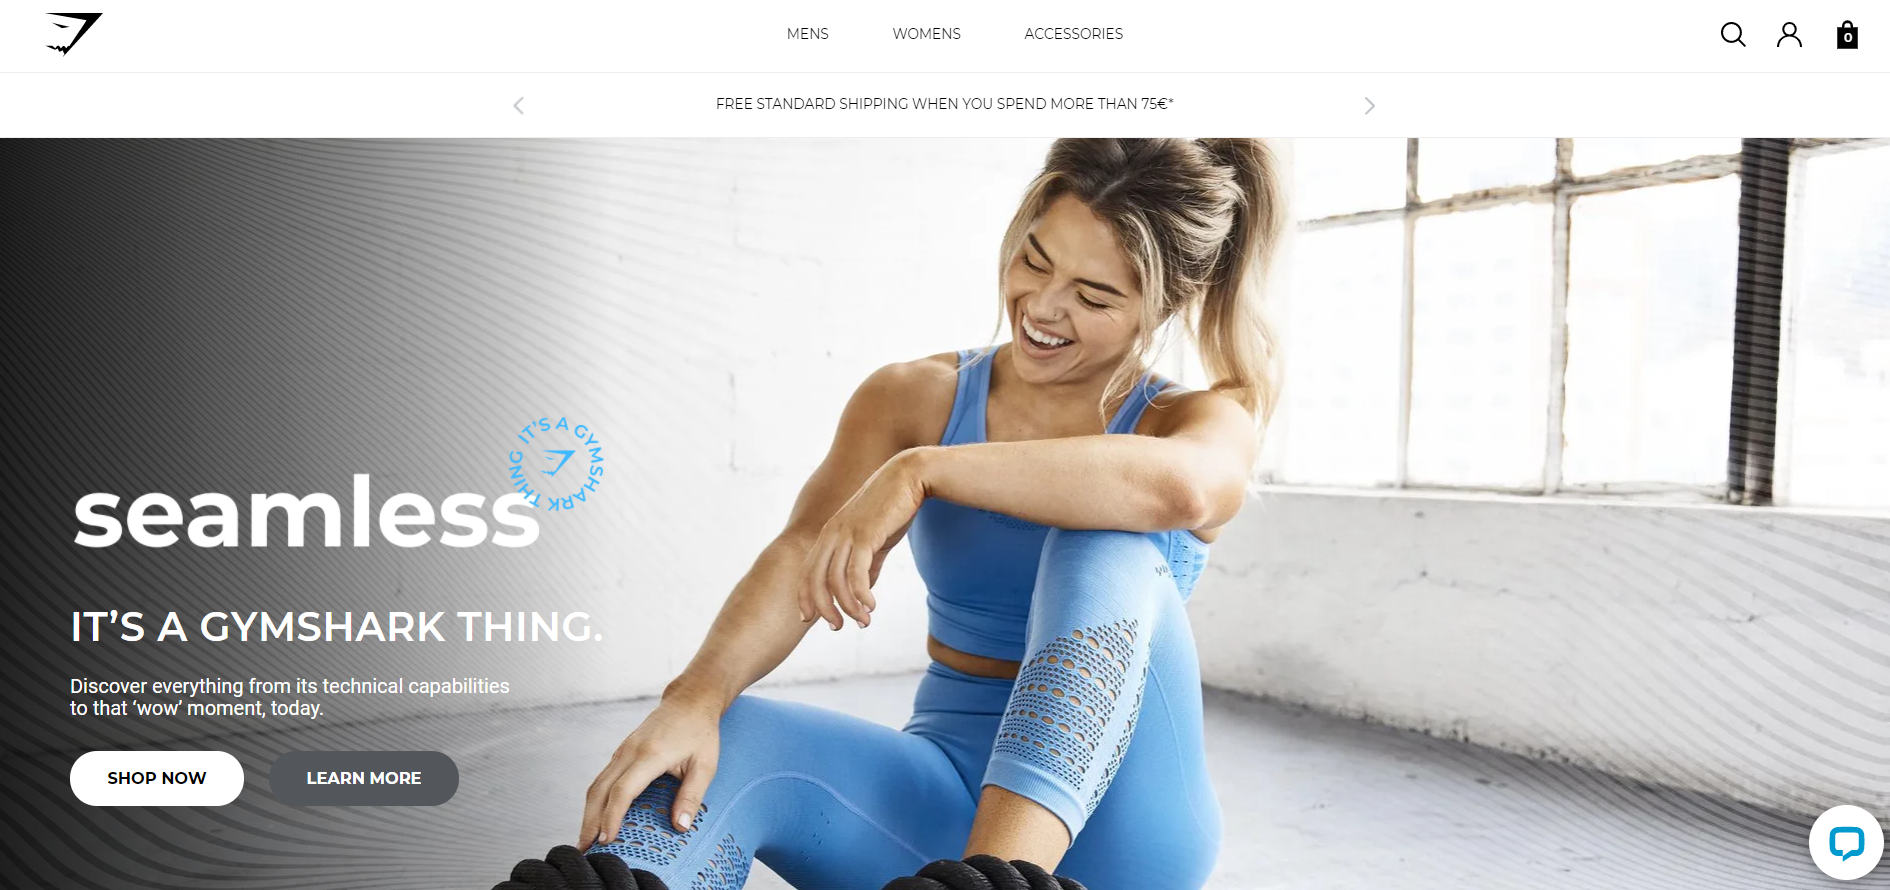 Gymshark top Shopify store homepage example